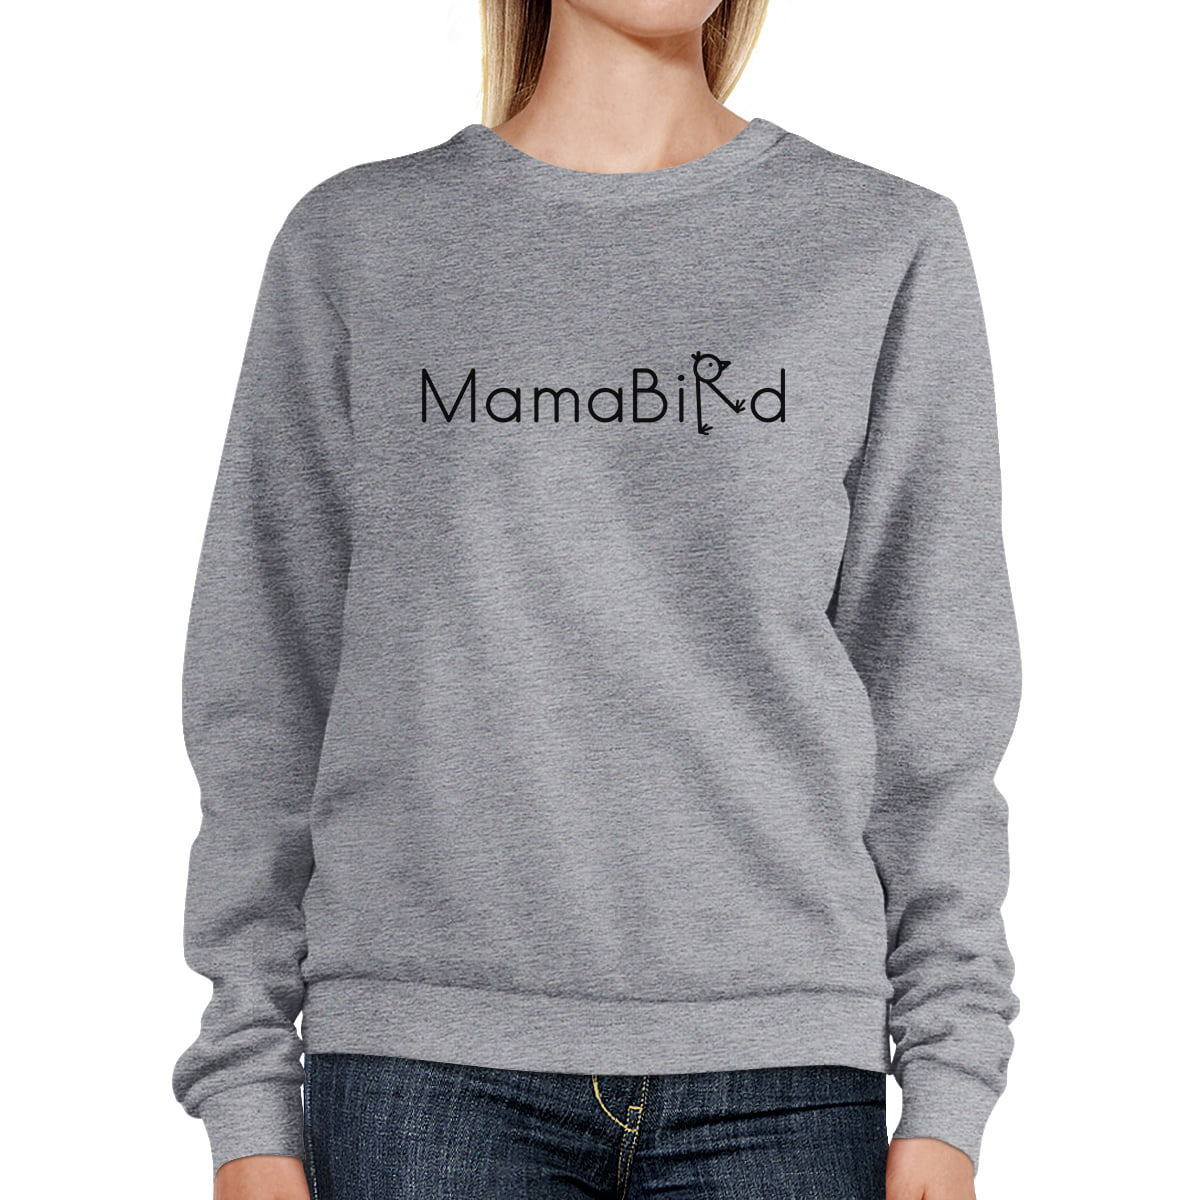 Details about   MamaBird Gray Unisex Cute Graphic Sweatshirt Gift Idea For New Moms